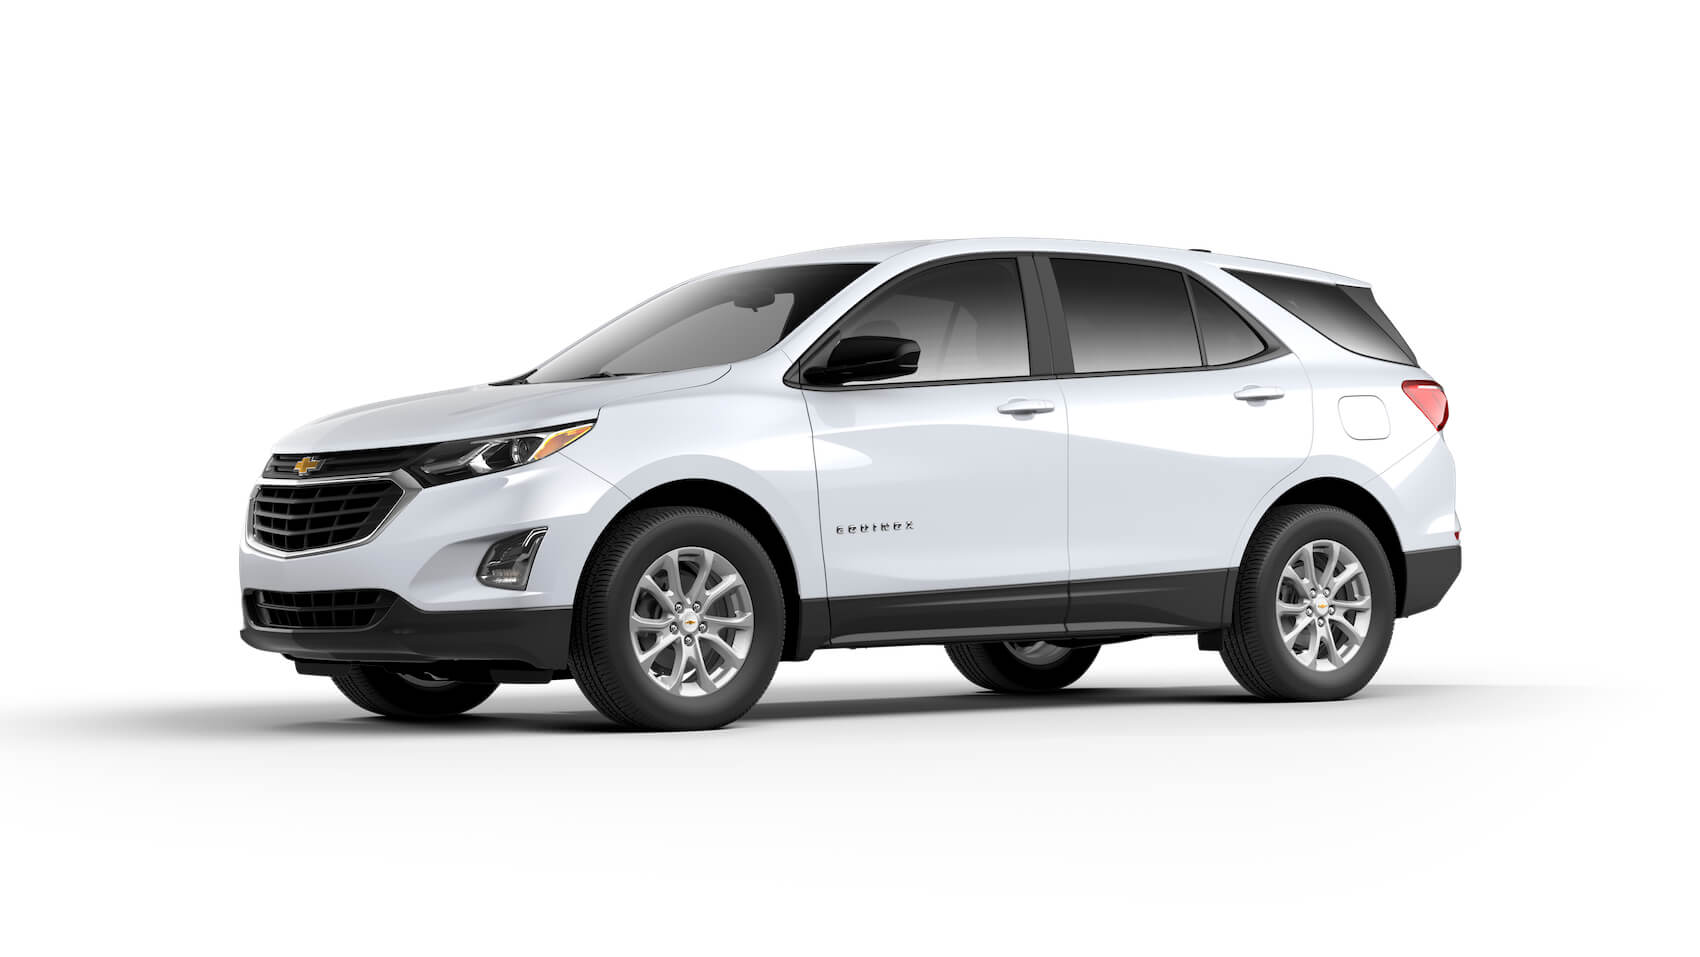 Certified pre-owned Chevy Equinox Taylor, MI